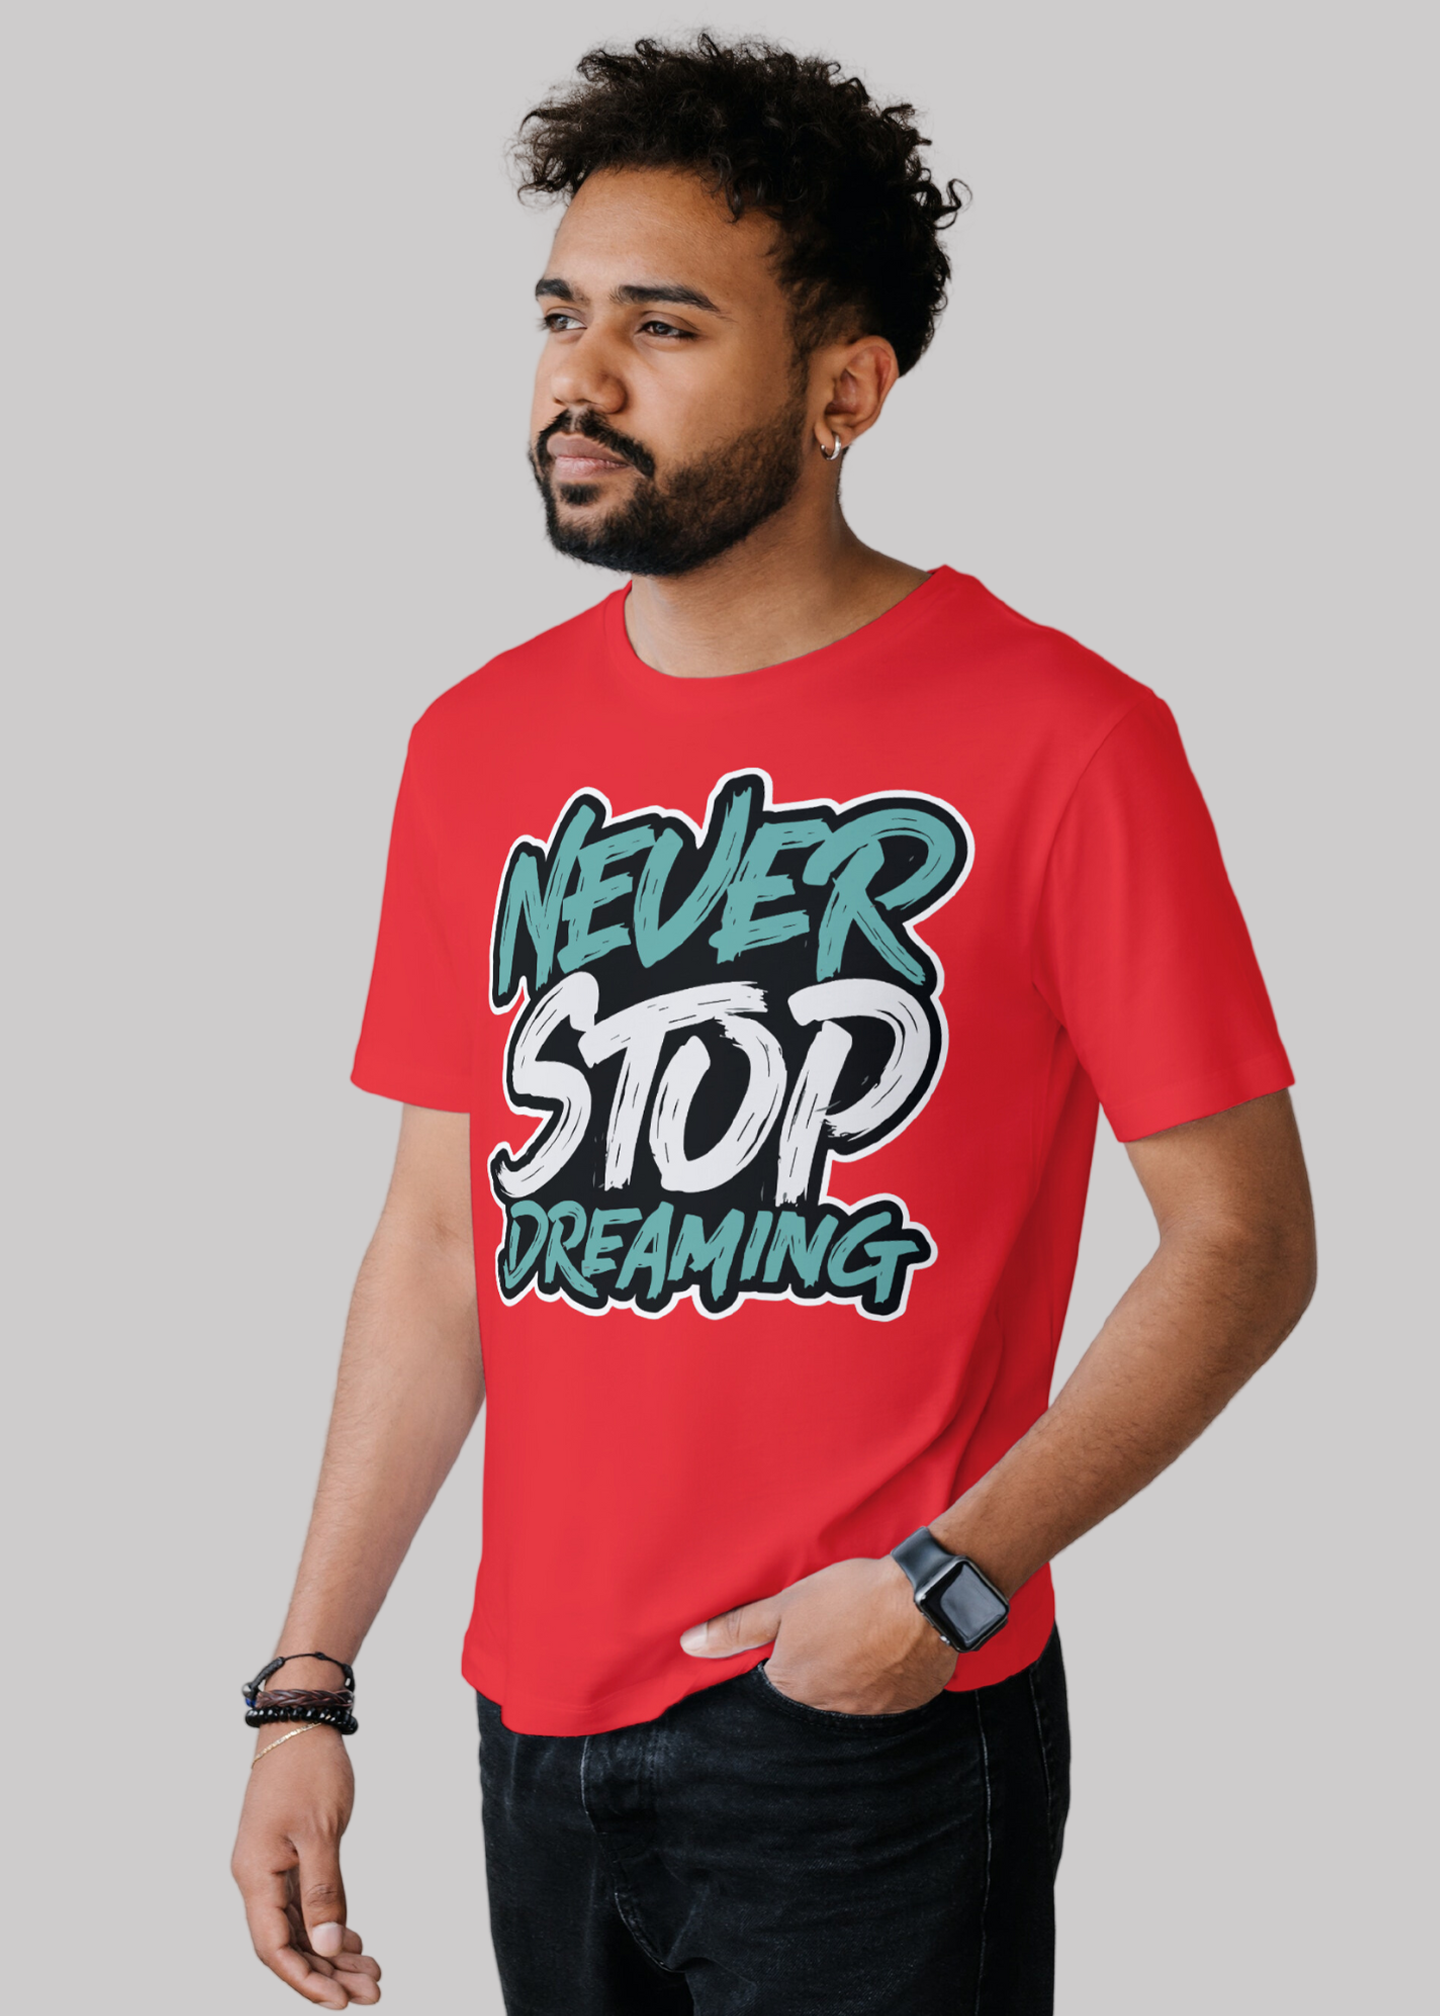 Never stop dreaming Printed Half Sleeve Premium Cotton T-shirt For Men